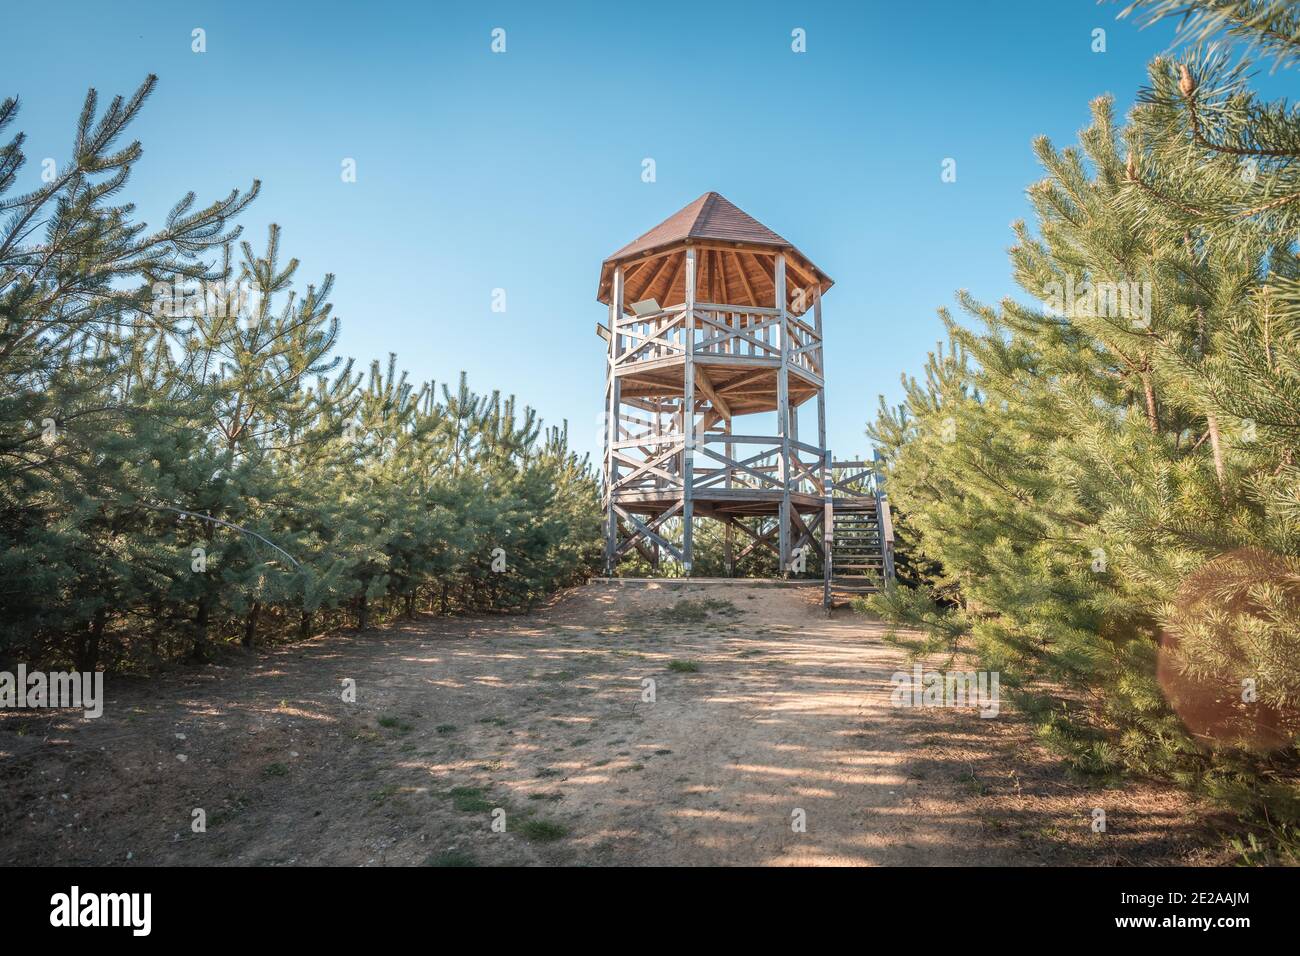 Rozhledna Kosice is a lookout tower in the forest park ner city Chlumec nad Cidlinou. It ios made of wood and it is 8m tall. Observation tower picture Stock Photo